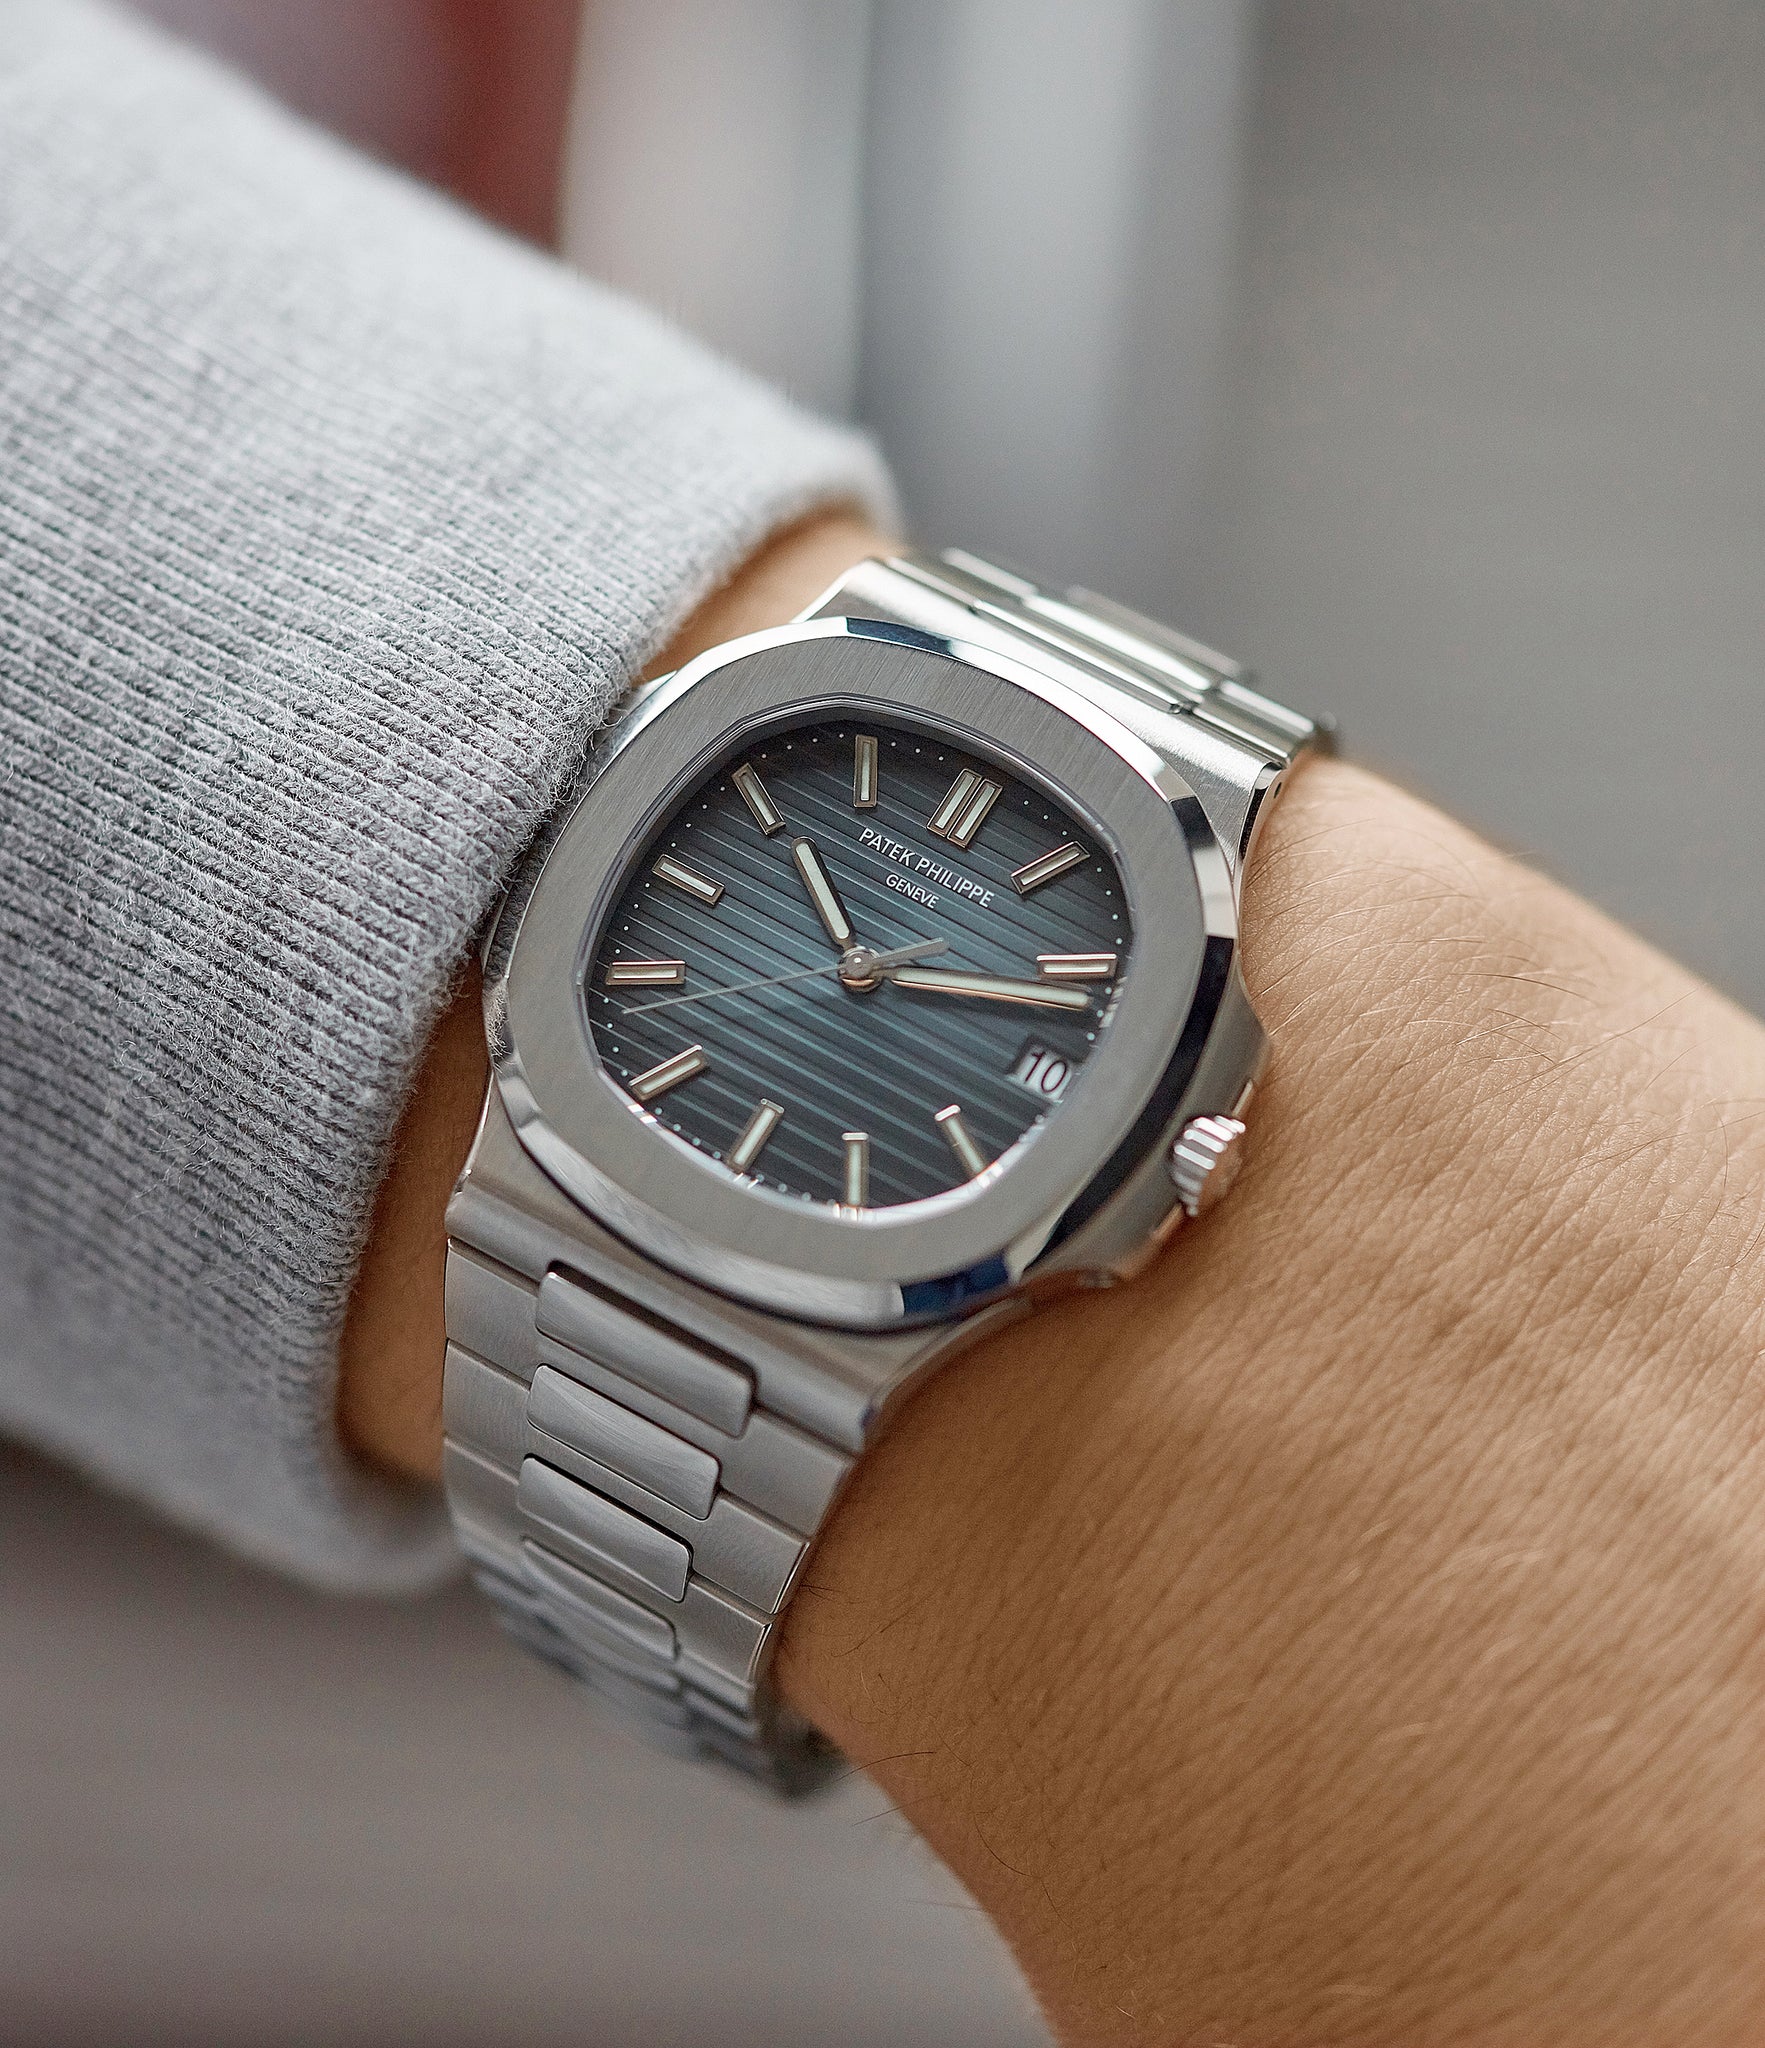 men's luxury sports watch 5711/1A-001 Patek Philippe Jumbo Nautilus steel pre-owned sport watch for sale online at A Collected Man London UK specialist of rare watches